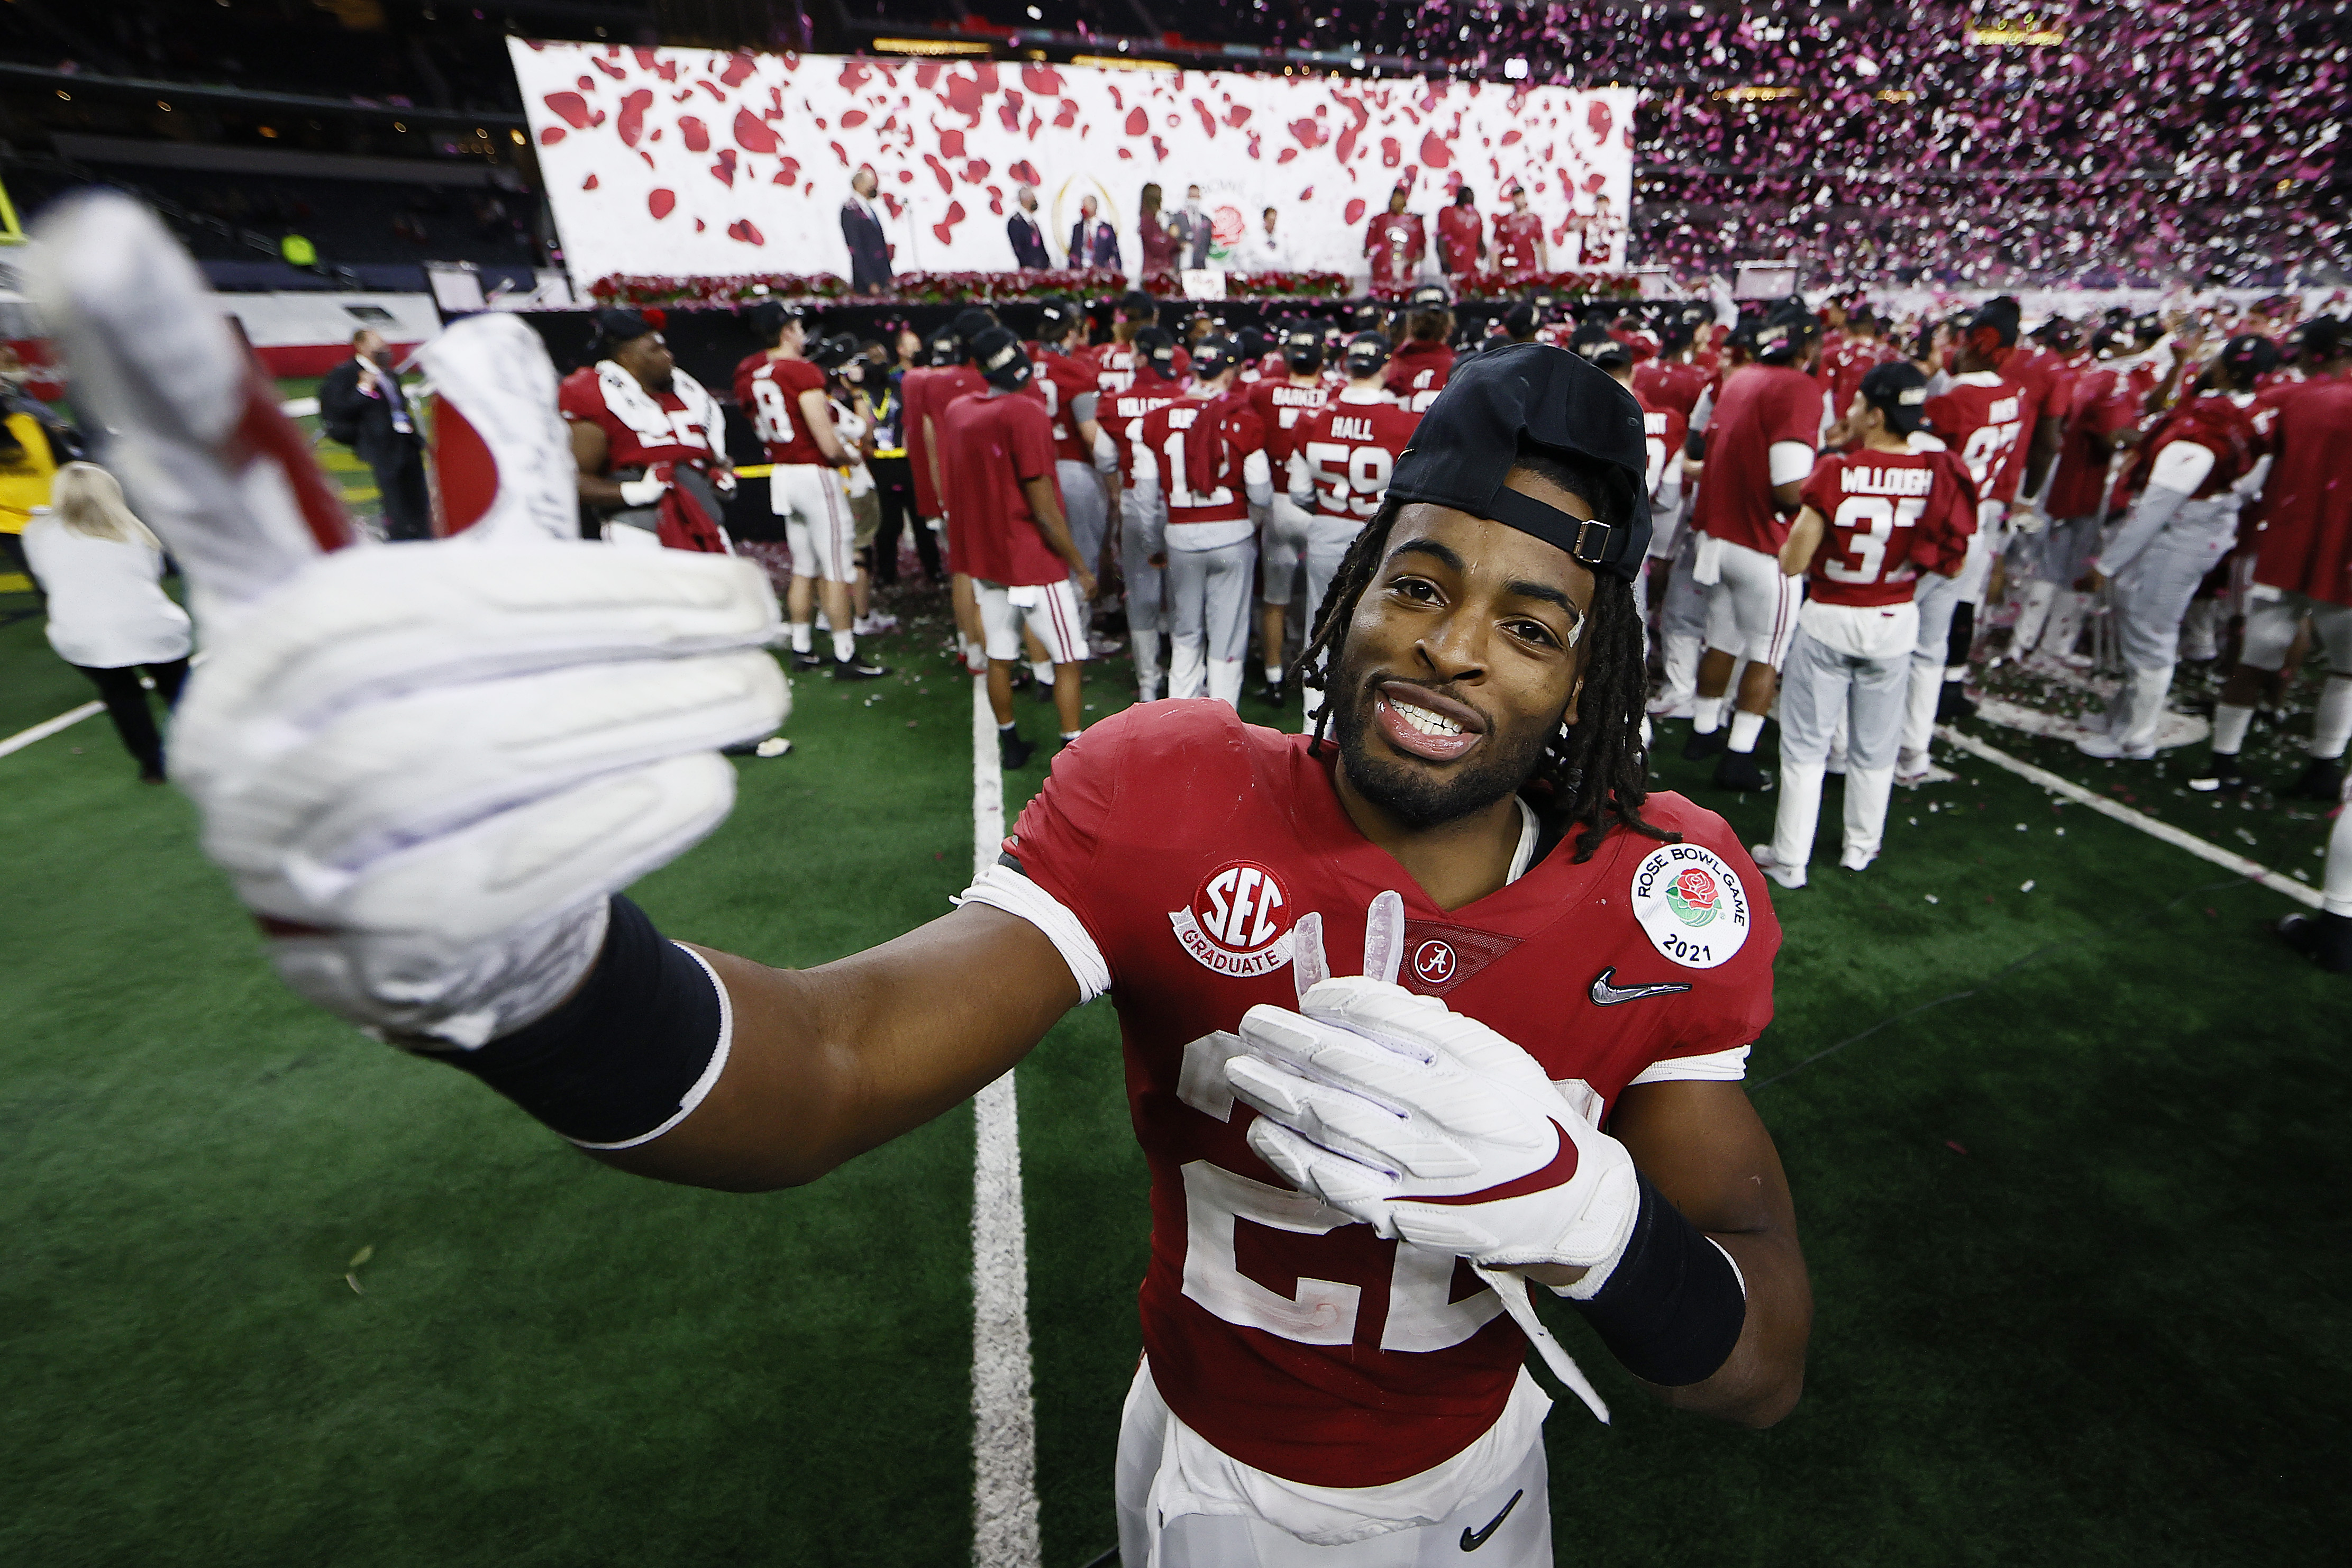 New Pittsburgh Steeler Najee Harris of the Alabama Crimson Tide celebrates after defeating the Notre Dame Fighting Irish 31-14 in the 2021 College Football Playoff Semifinal Game at the Rose Bowl Game on January 01, 2021 in Arlington, Texas.